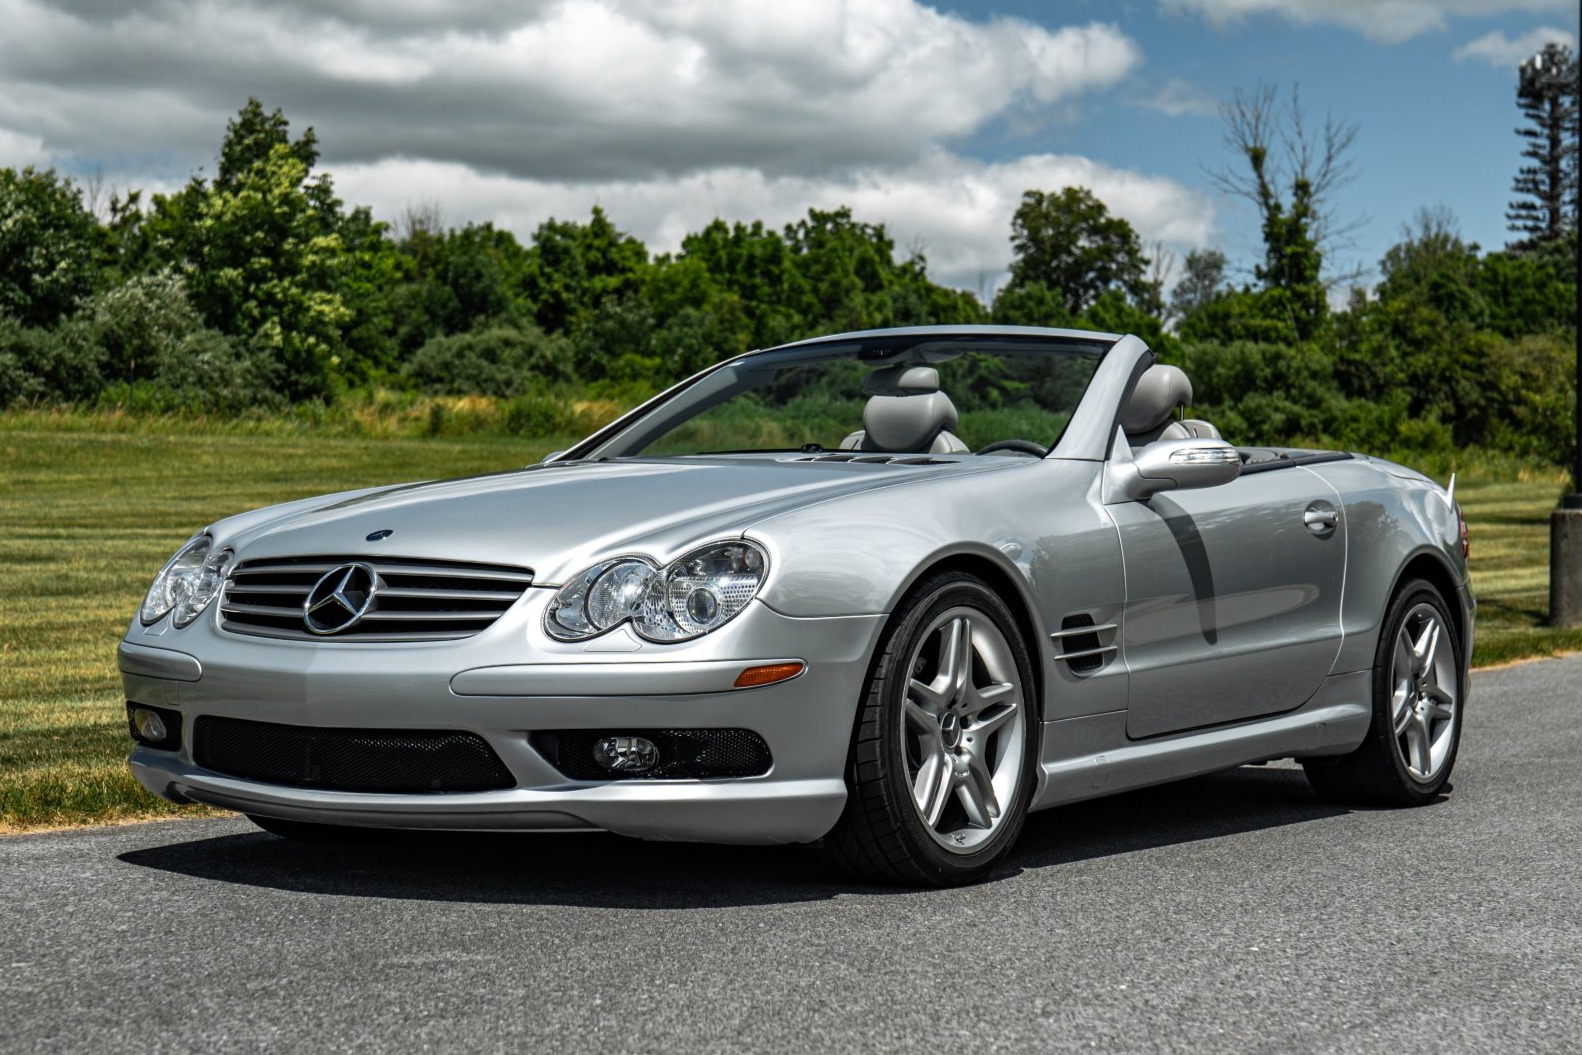 Used 2006 Mercedes-Benz SL500 Review